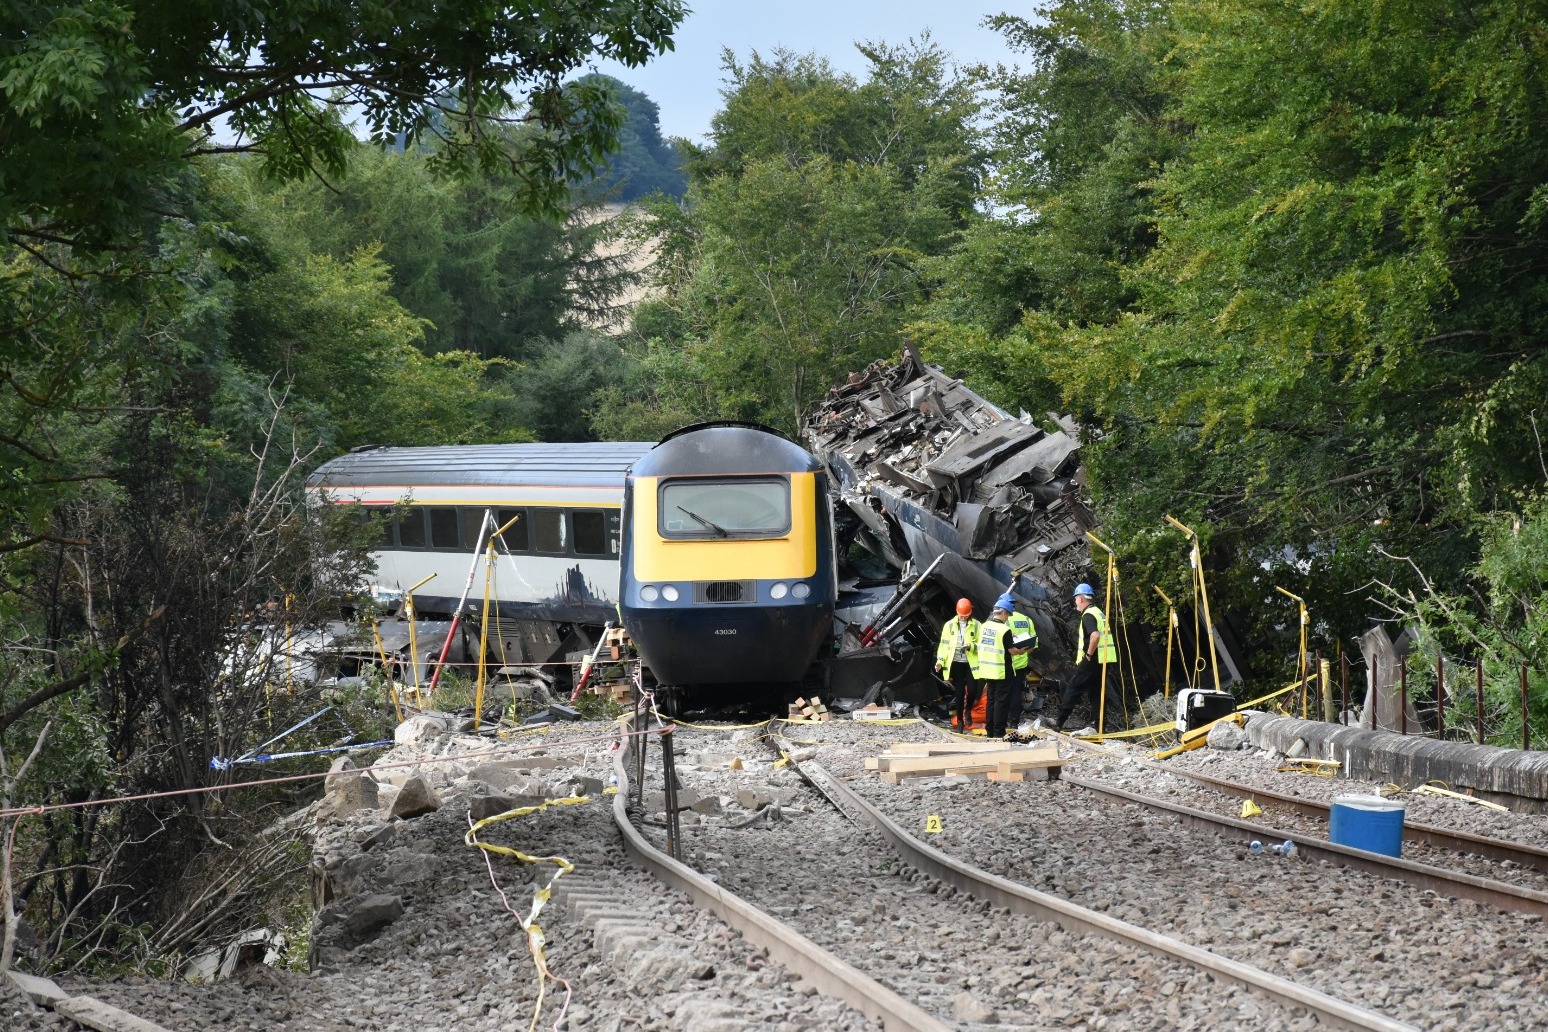 Union calls for high-speed trains to be withdrawn in wake of Stonehaven crash 